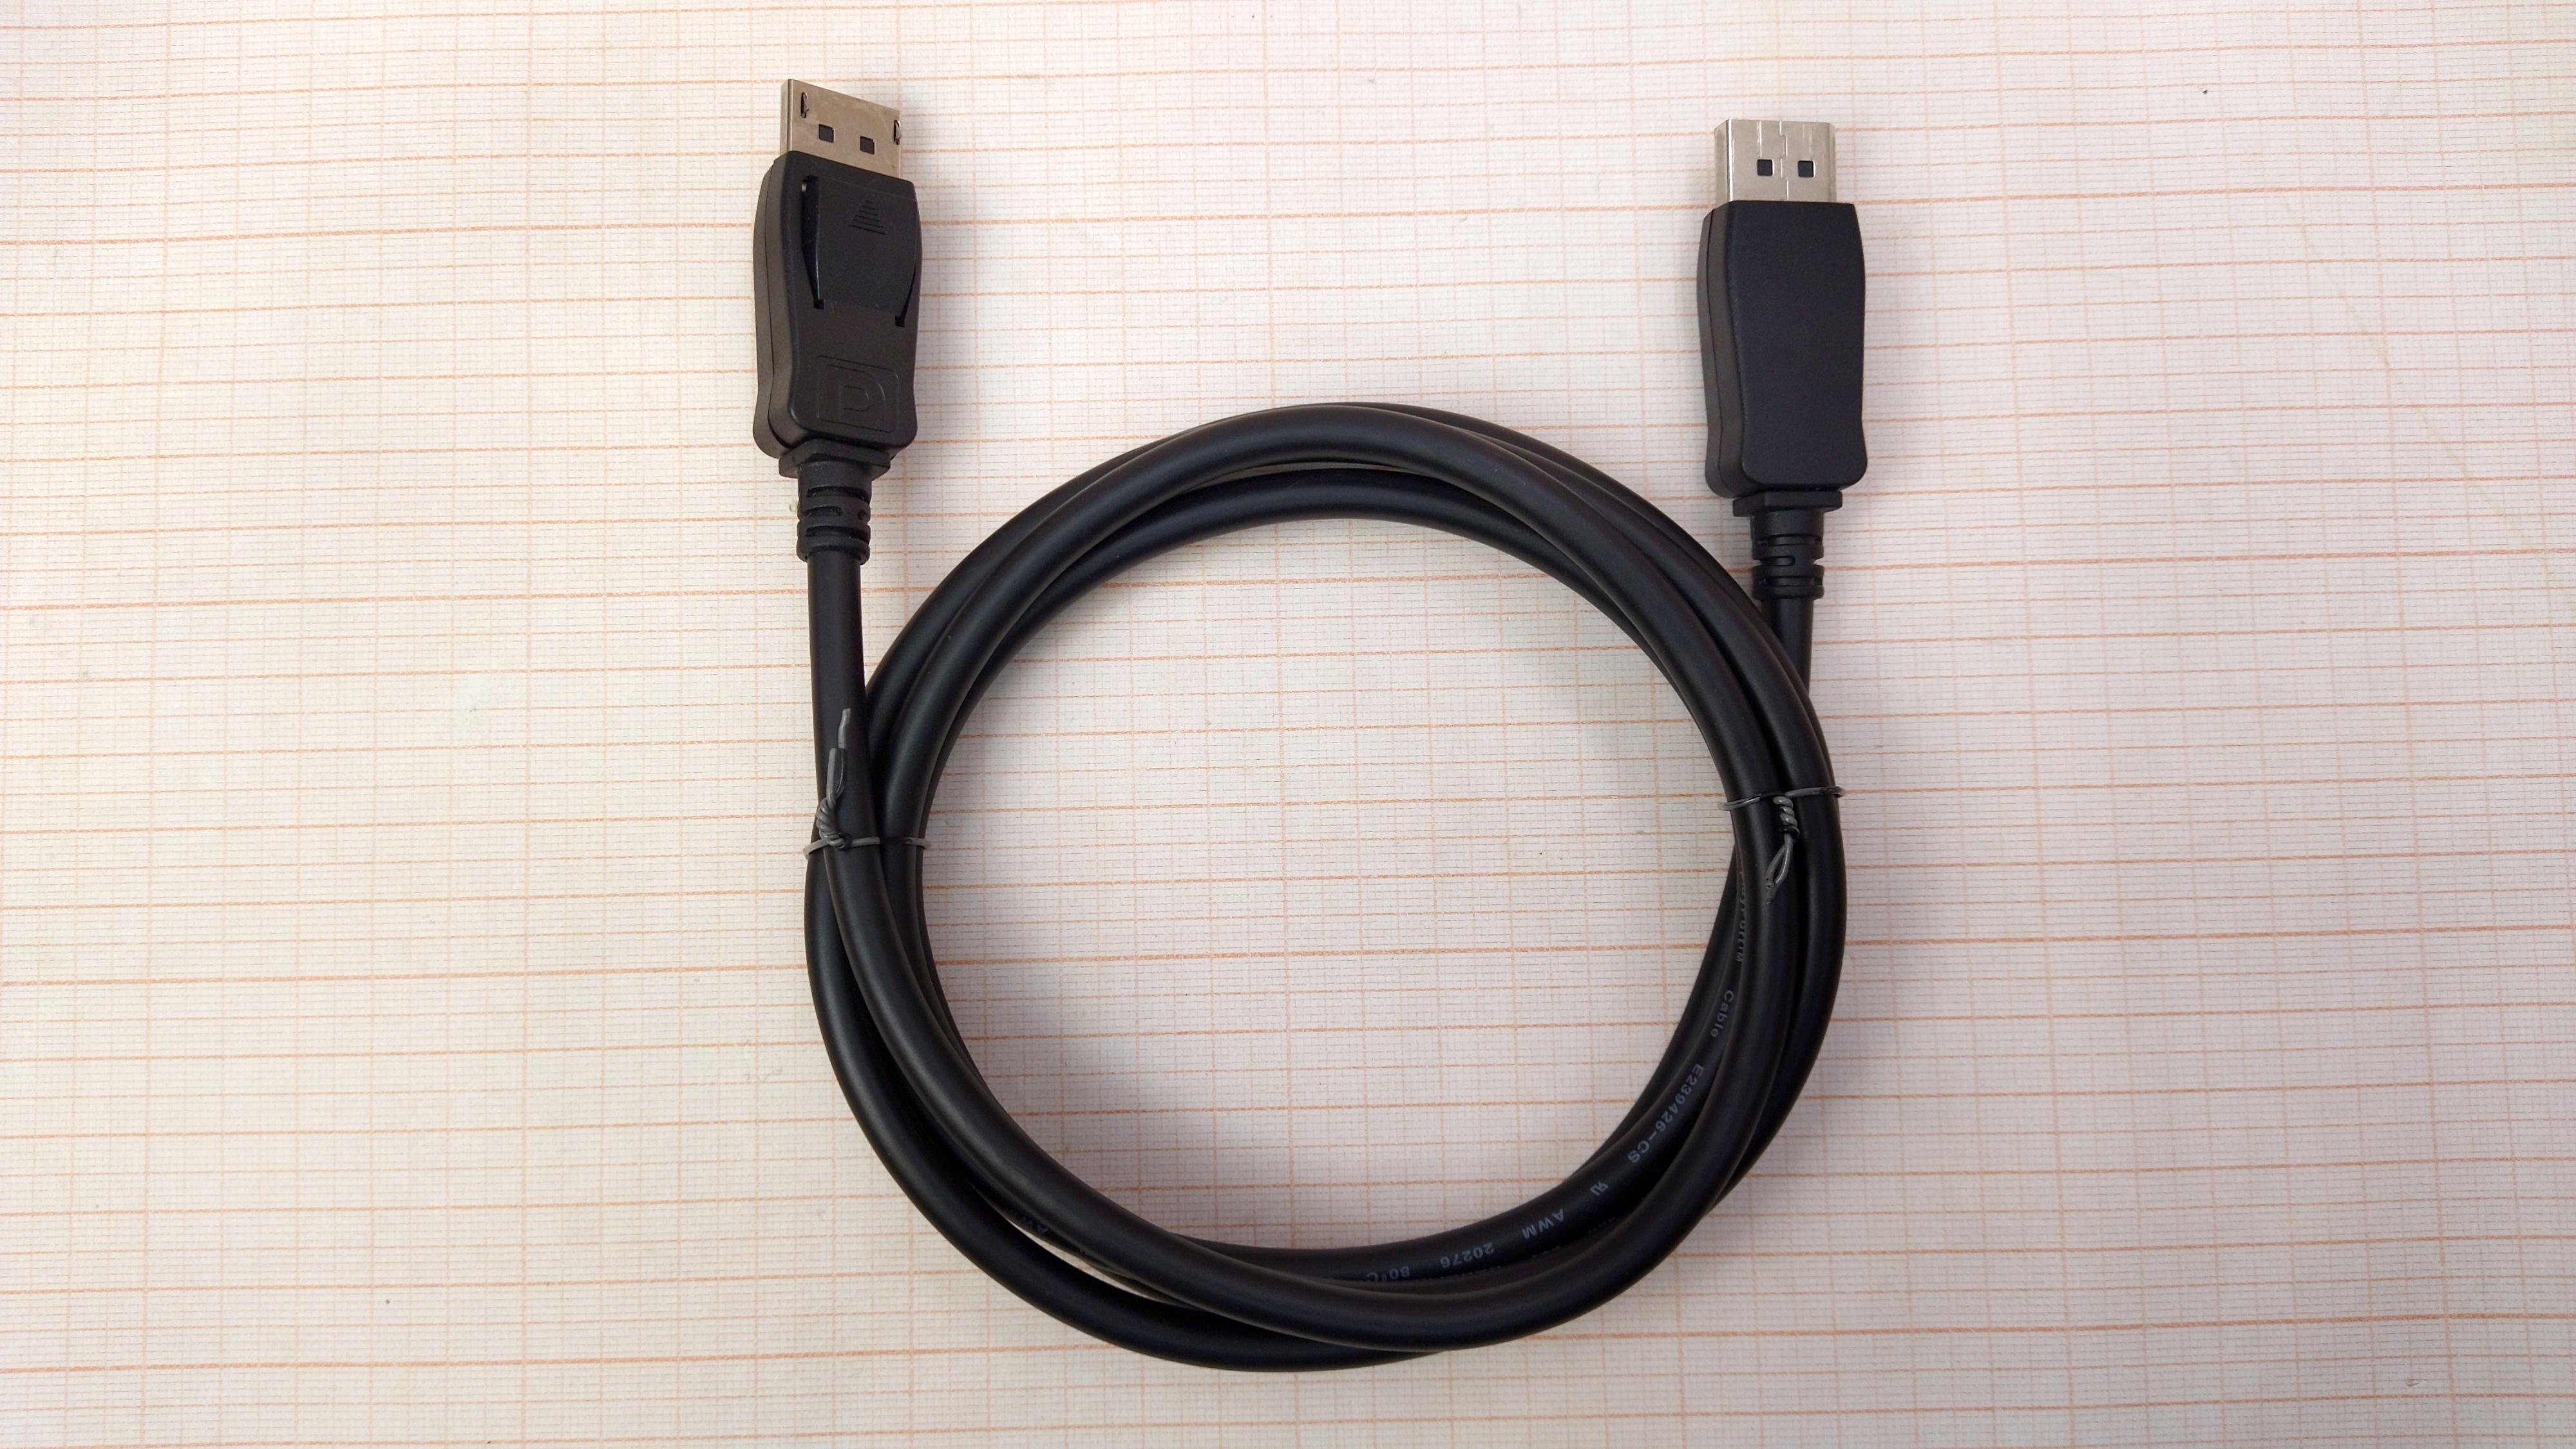 donor Brawl Change displayport cable e239426 c Get used to vitamin